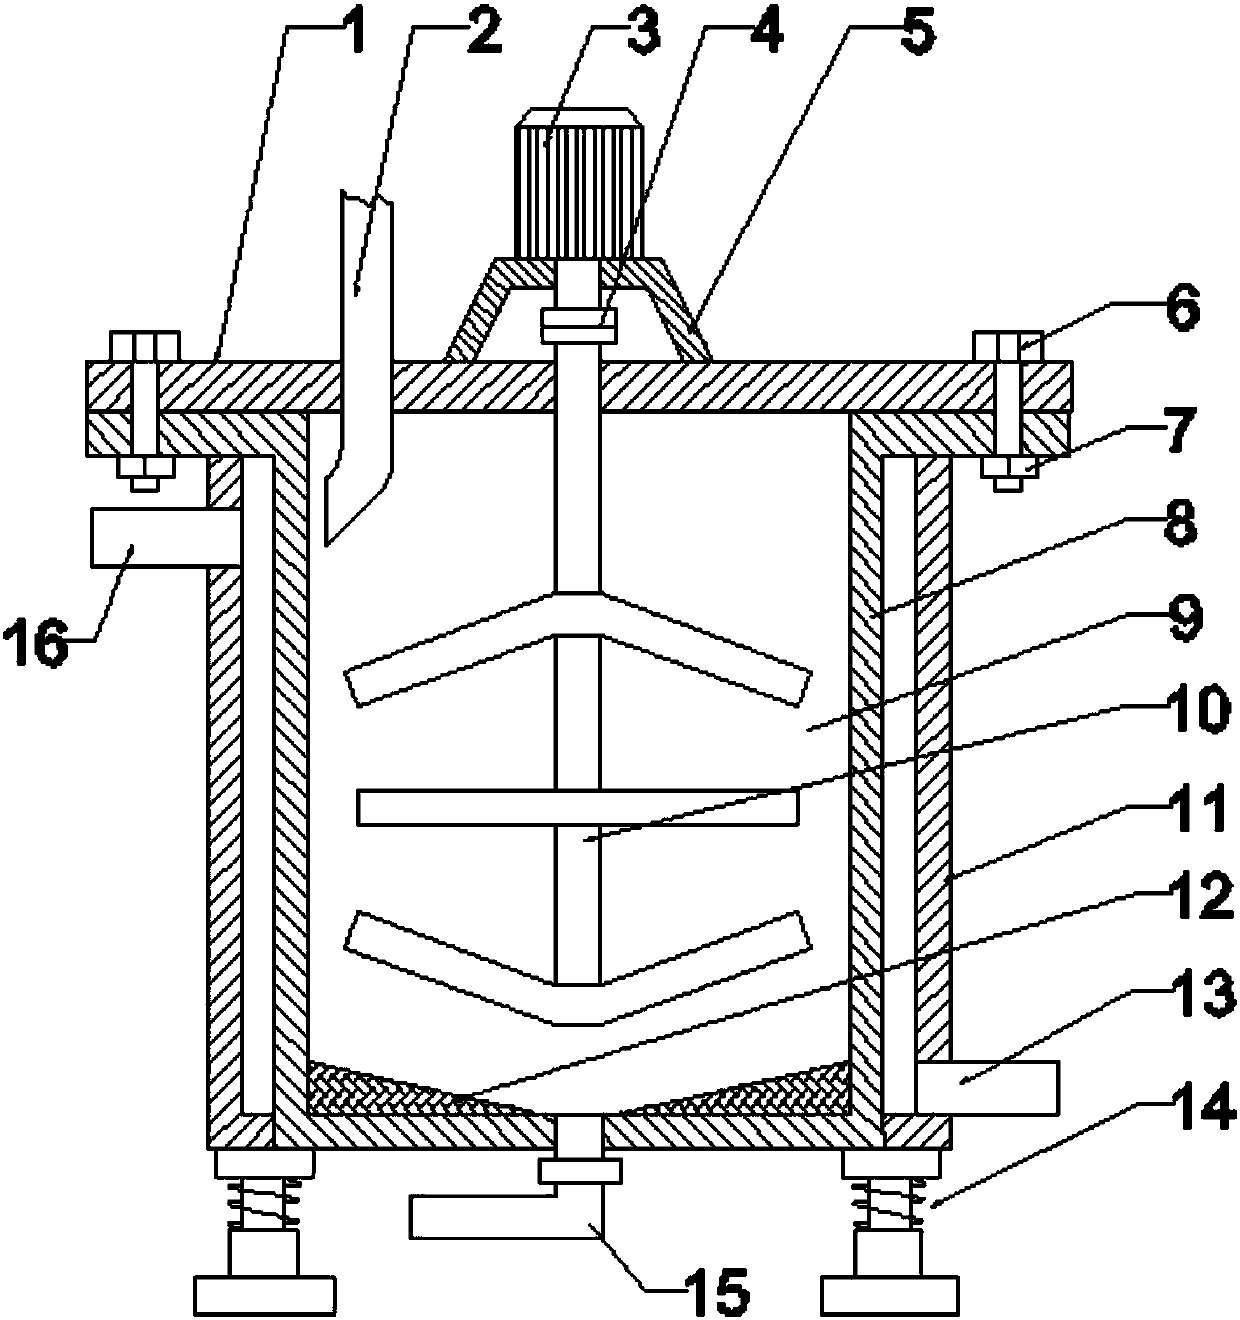 Cooling device for dairy product processing